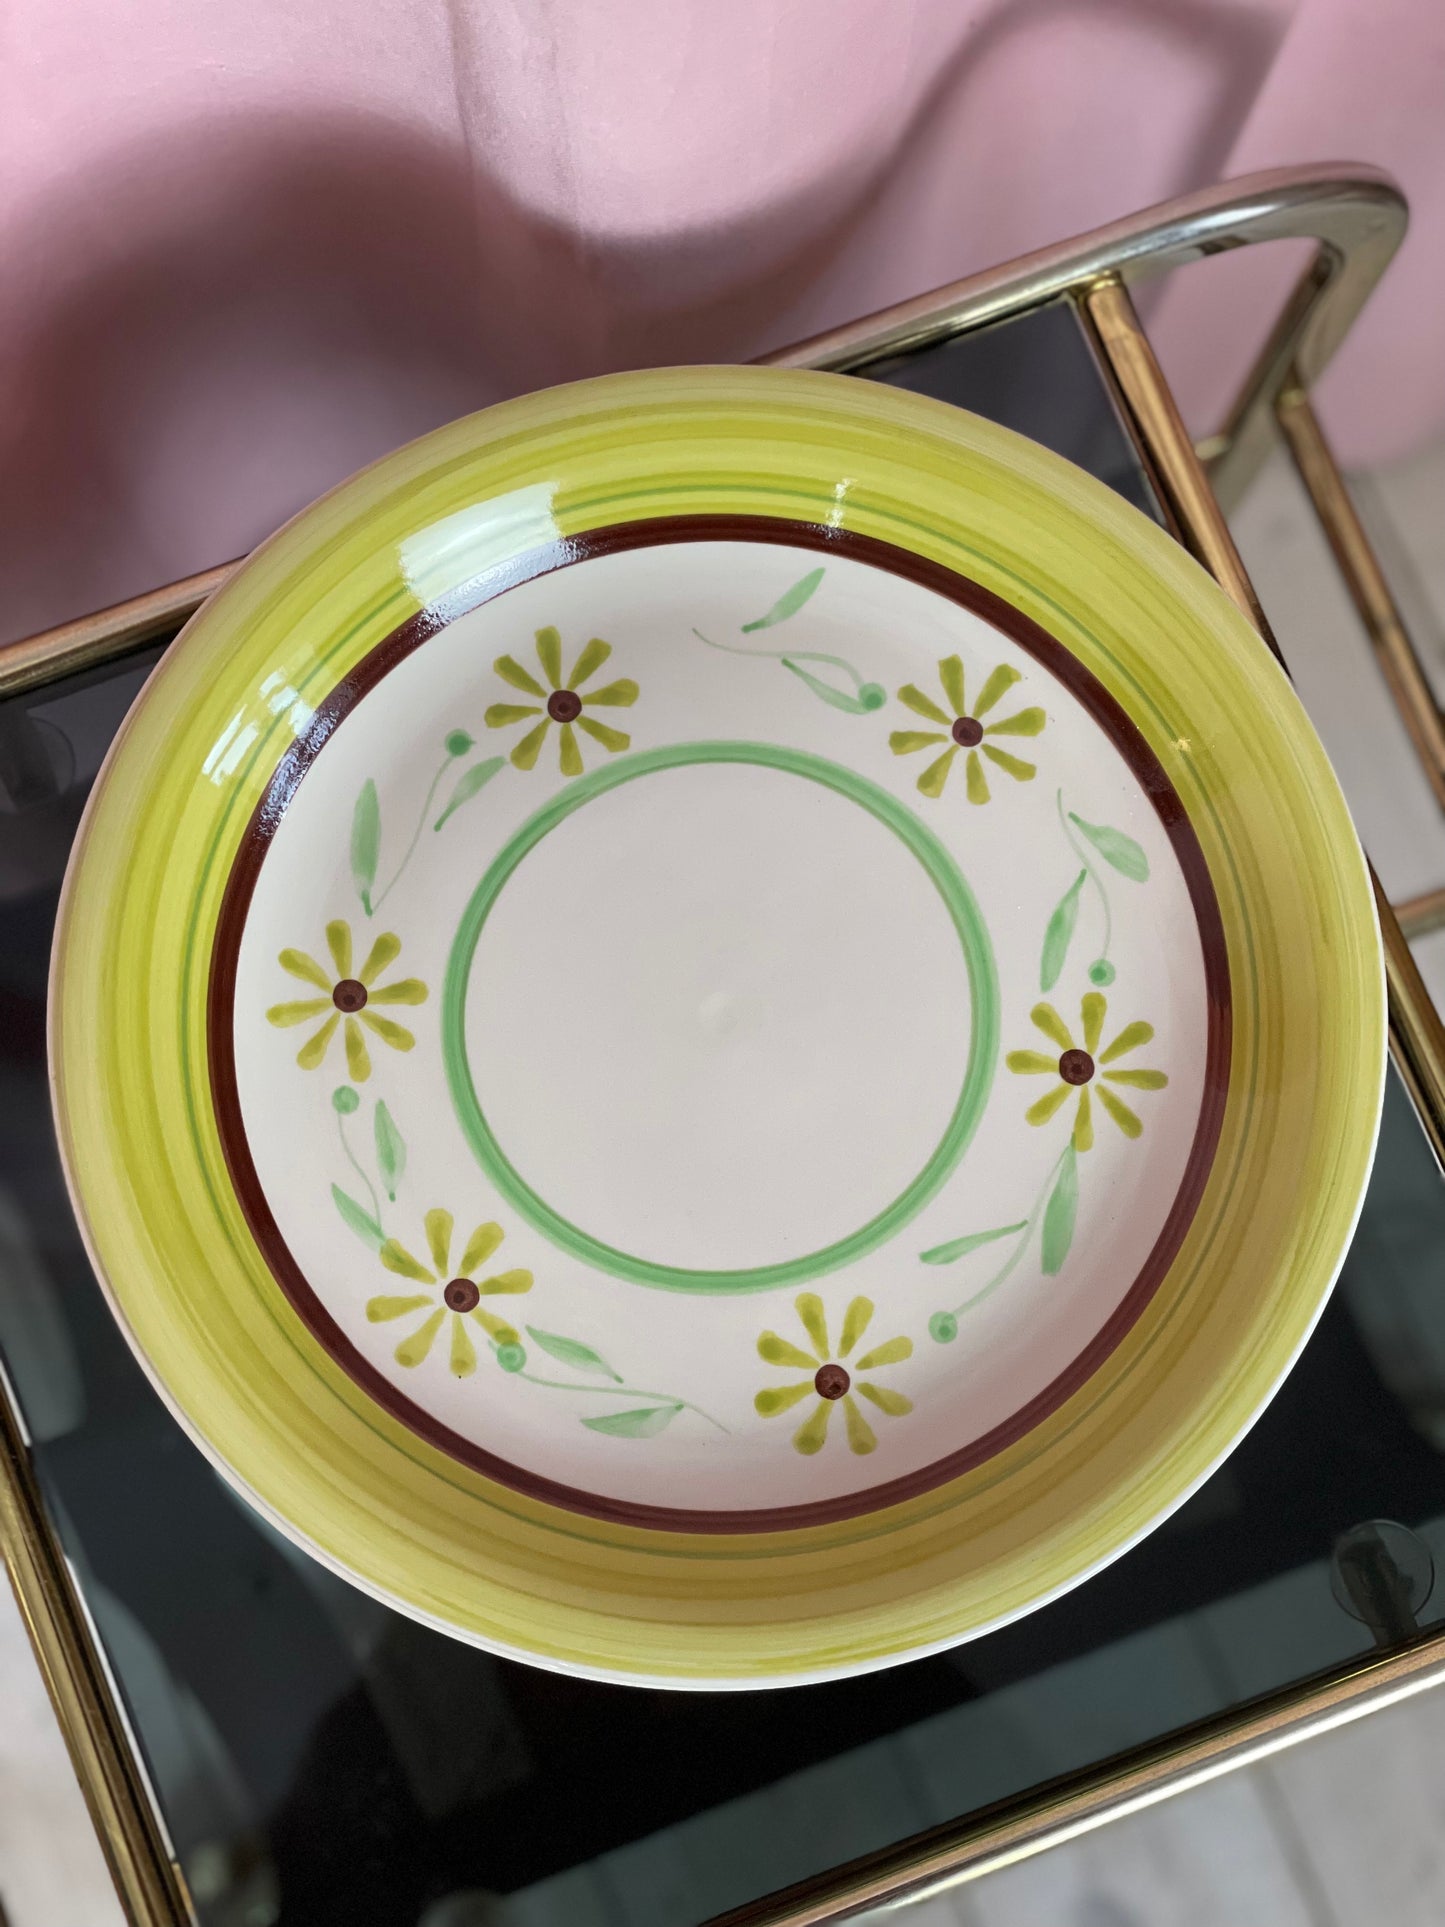 Dinner plates with flowers